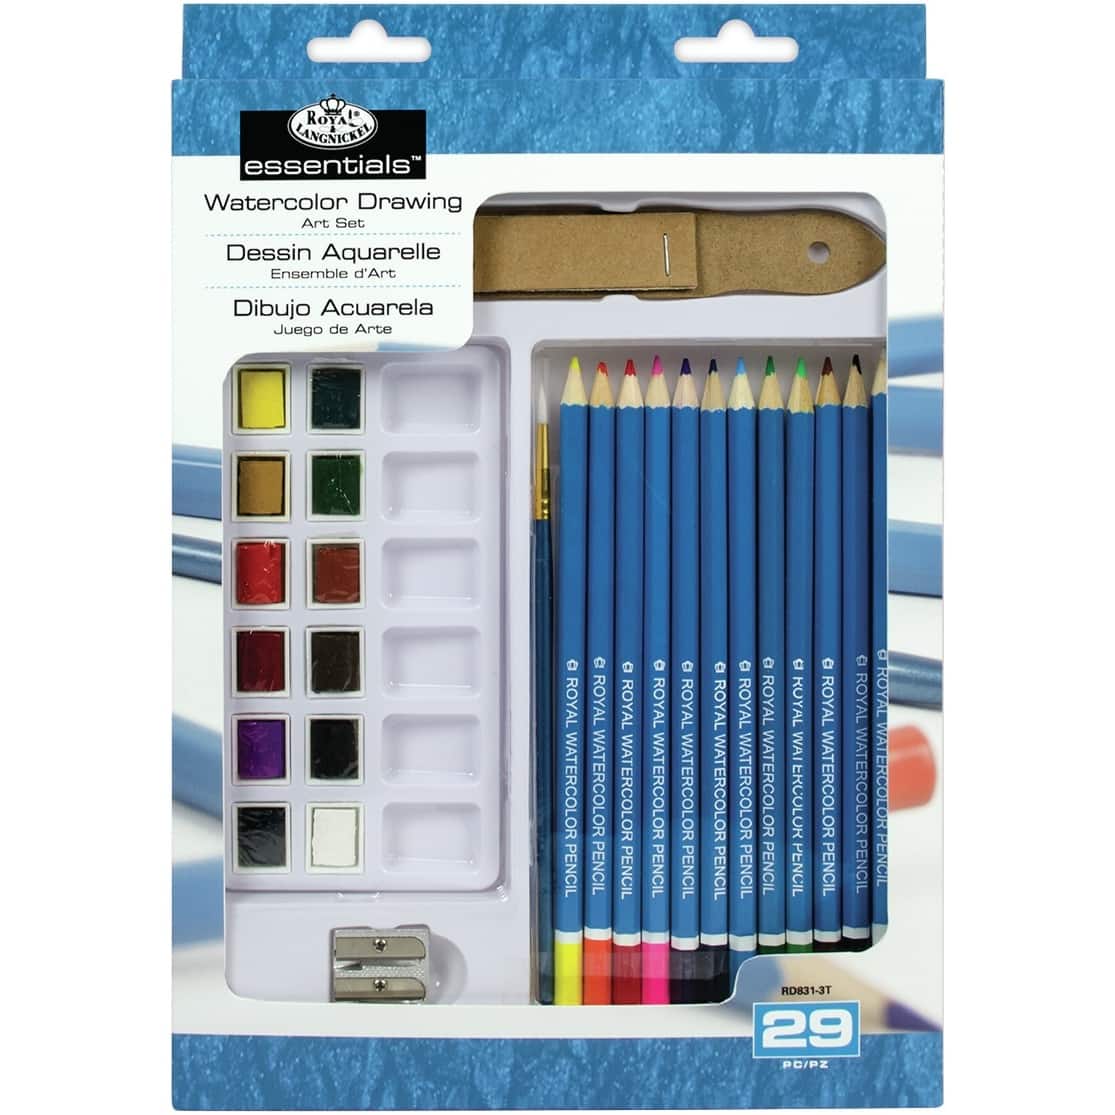 Royal & Langnickel Watercolor Drawing Art Set,Essential Clear View,29 Pieces,Artist Paint,Pencil,Drawing Set